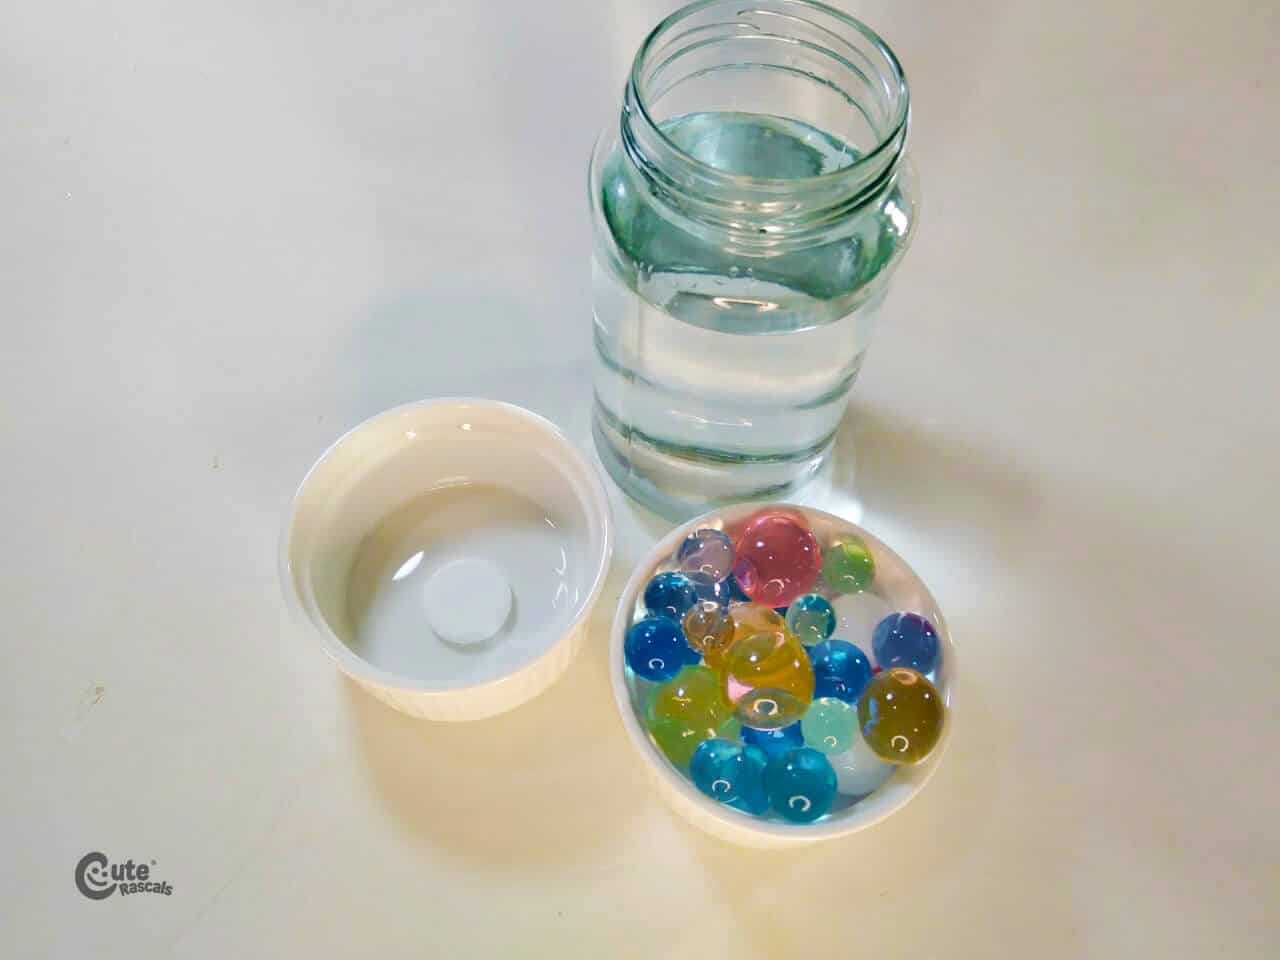 Materials Colored Candies. Fun easy science experiments for kids